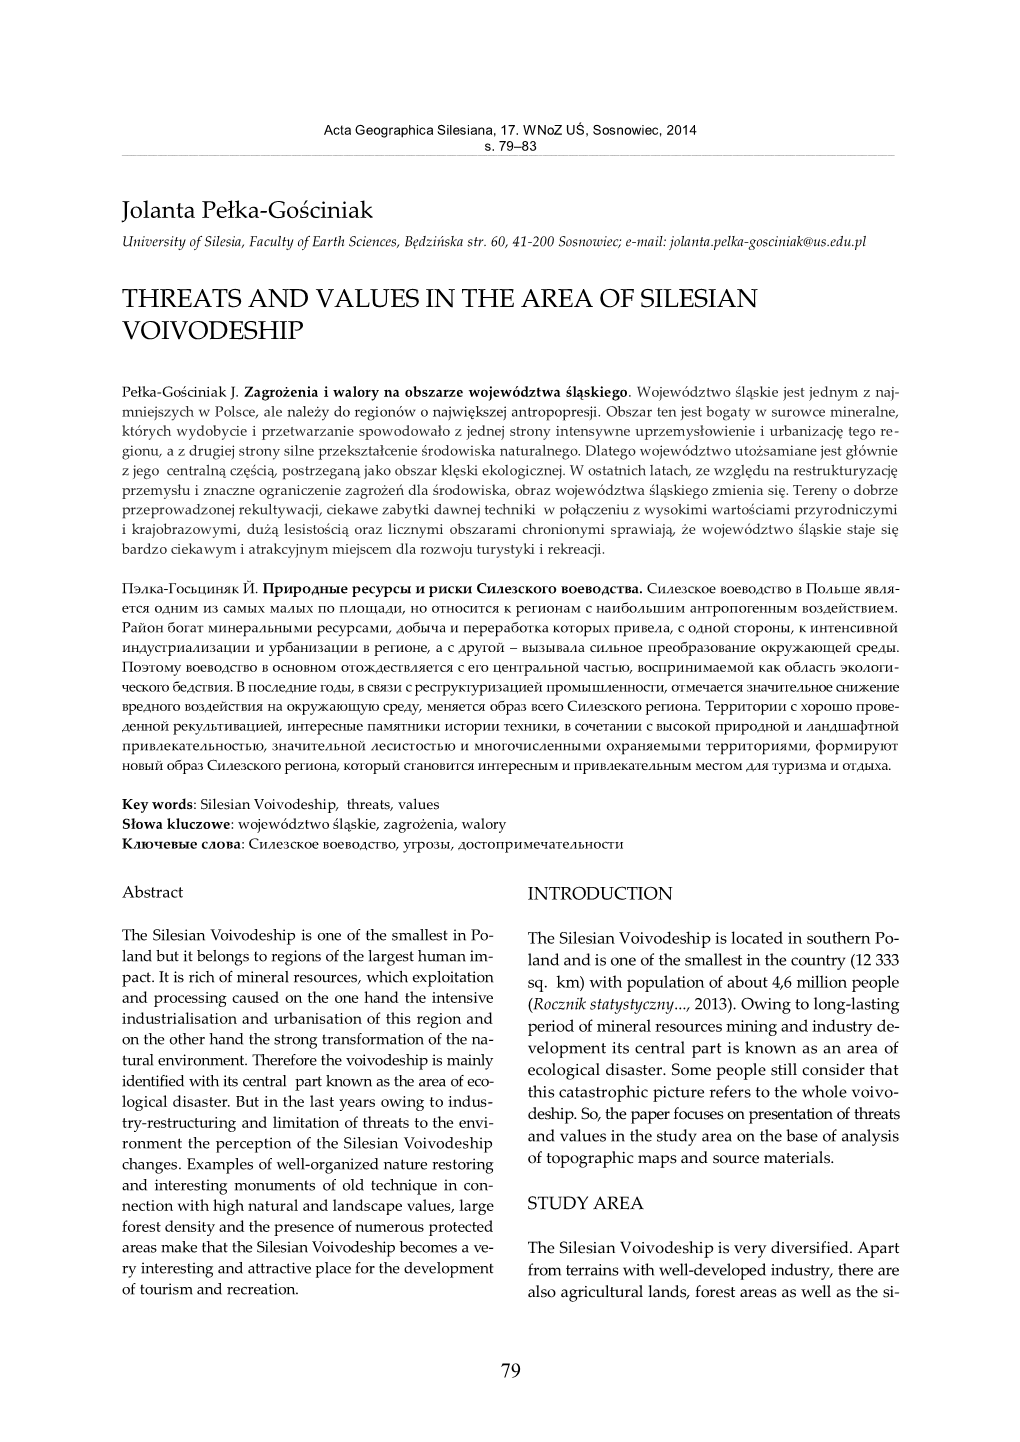 Threats and Values in the Area of Silesian Voivodeship